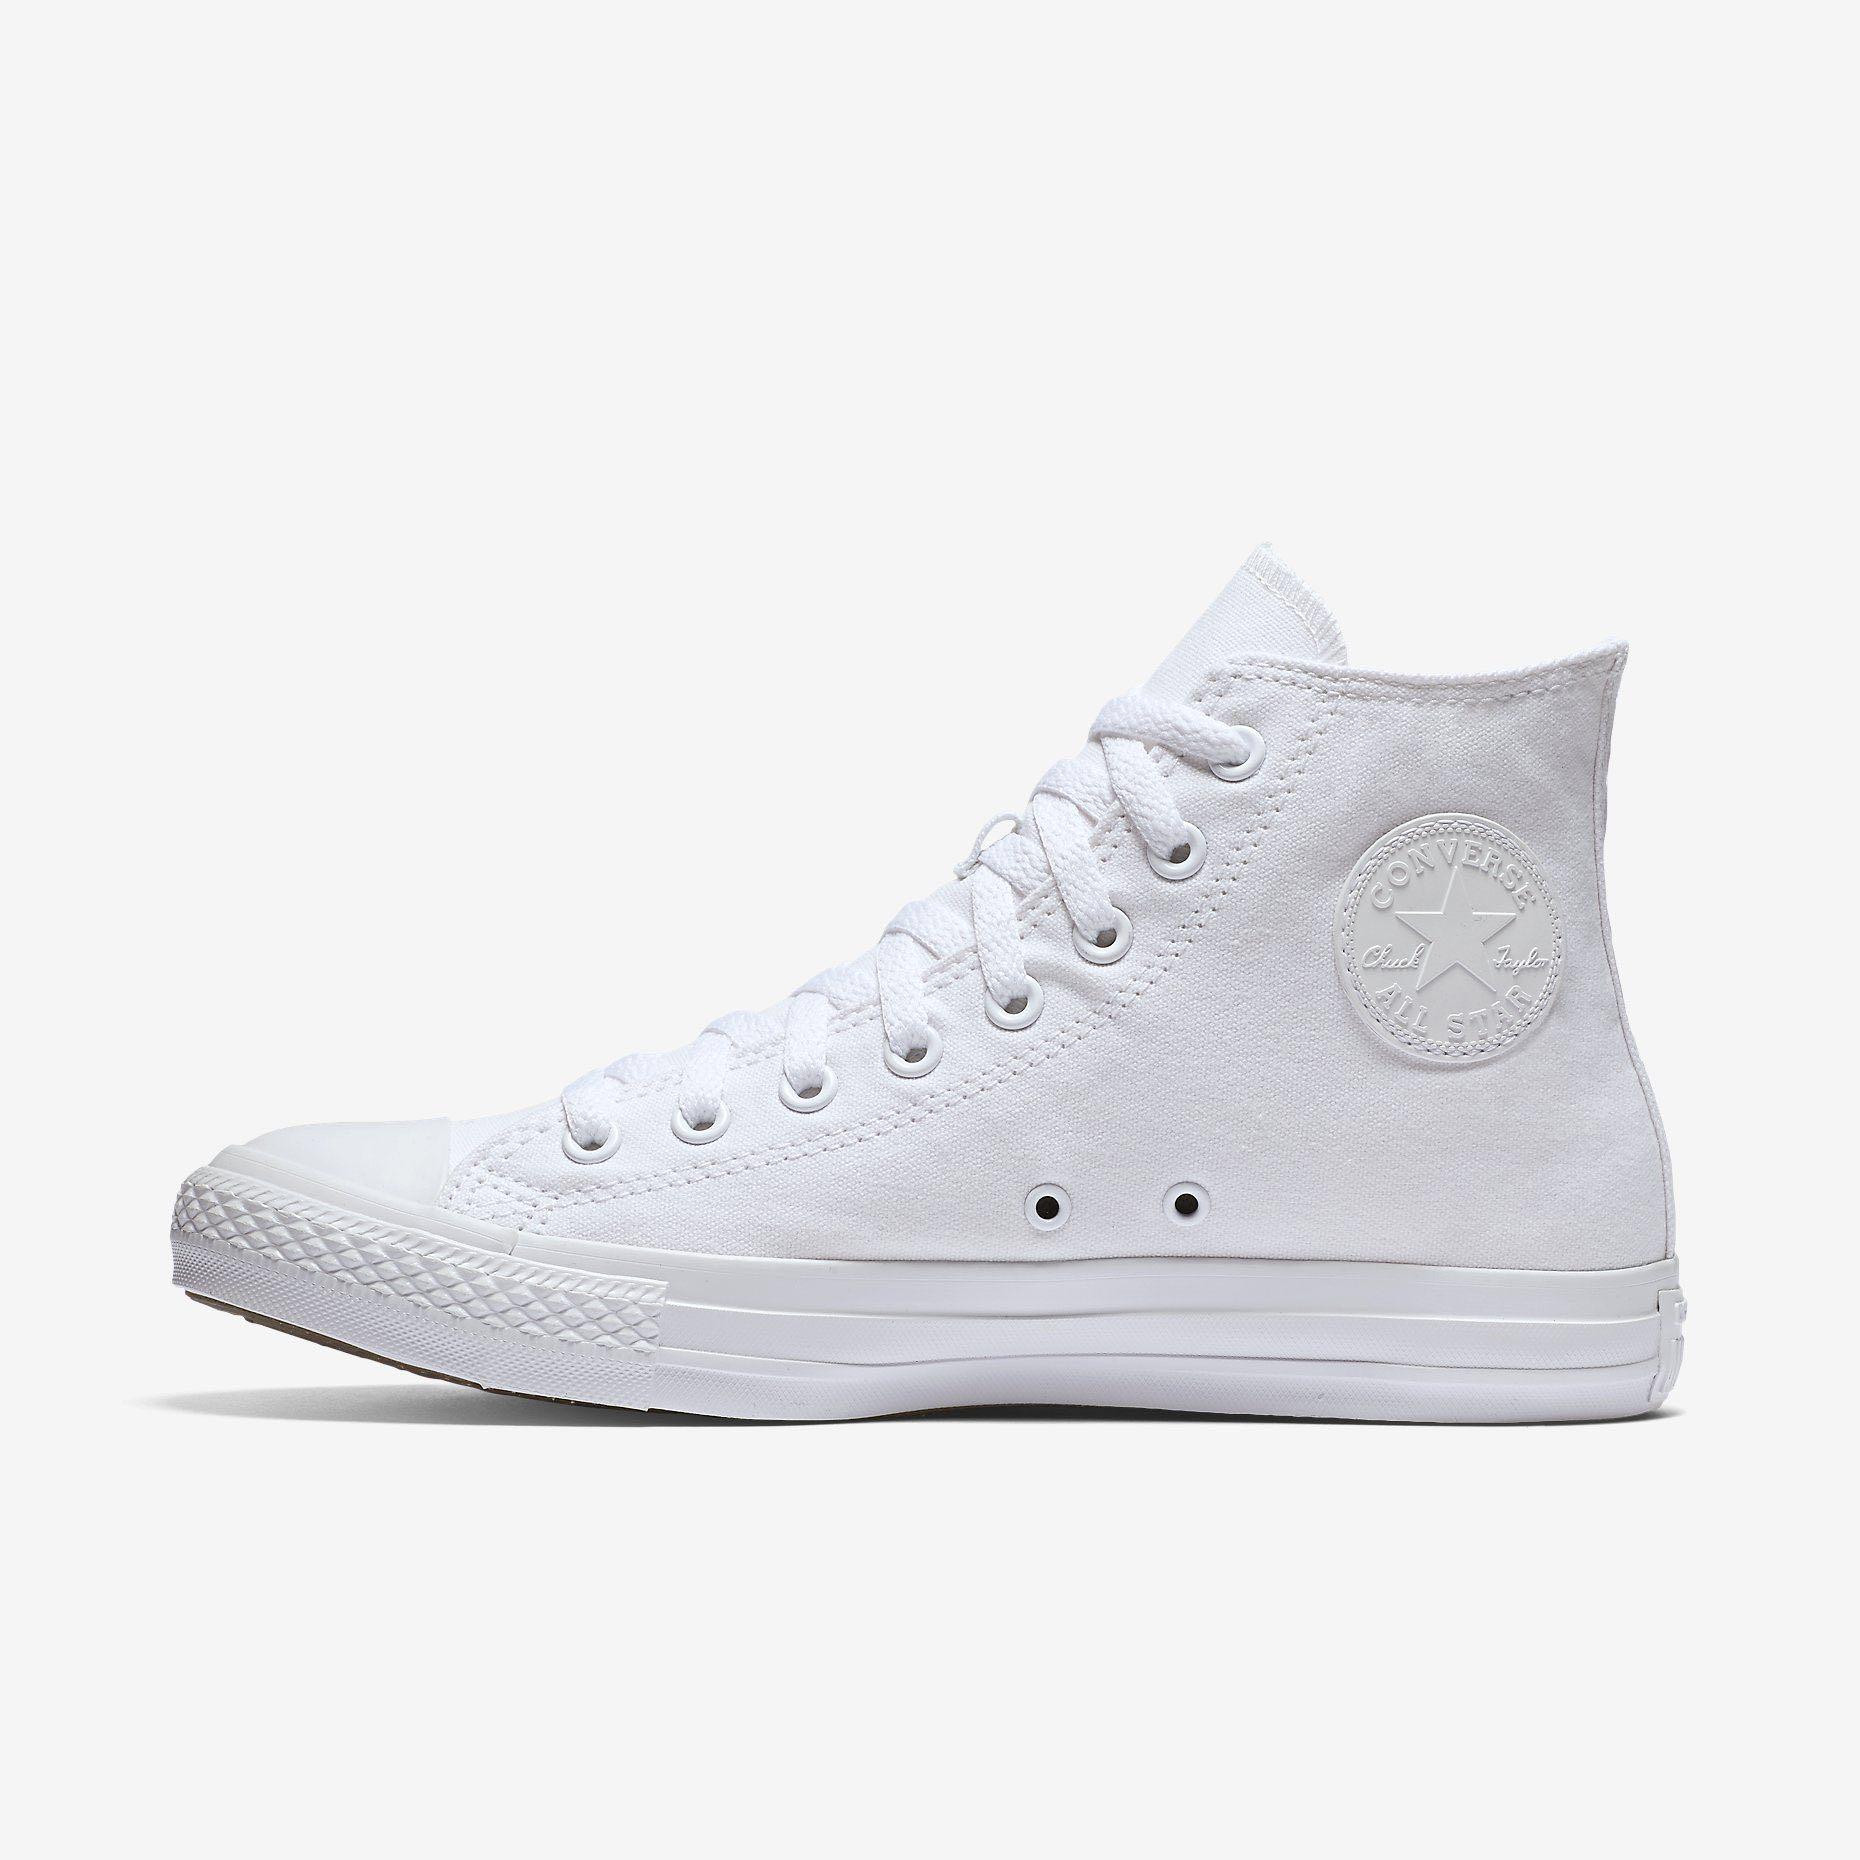 Converse Chuck Taylor, Women's Fashion, Shoes, Sneakers on Carousell